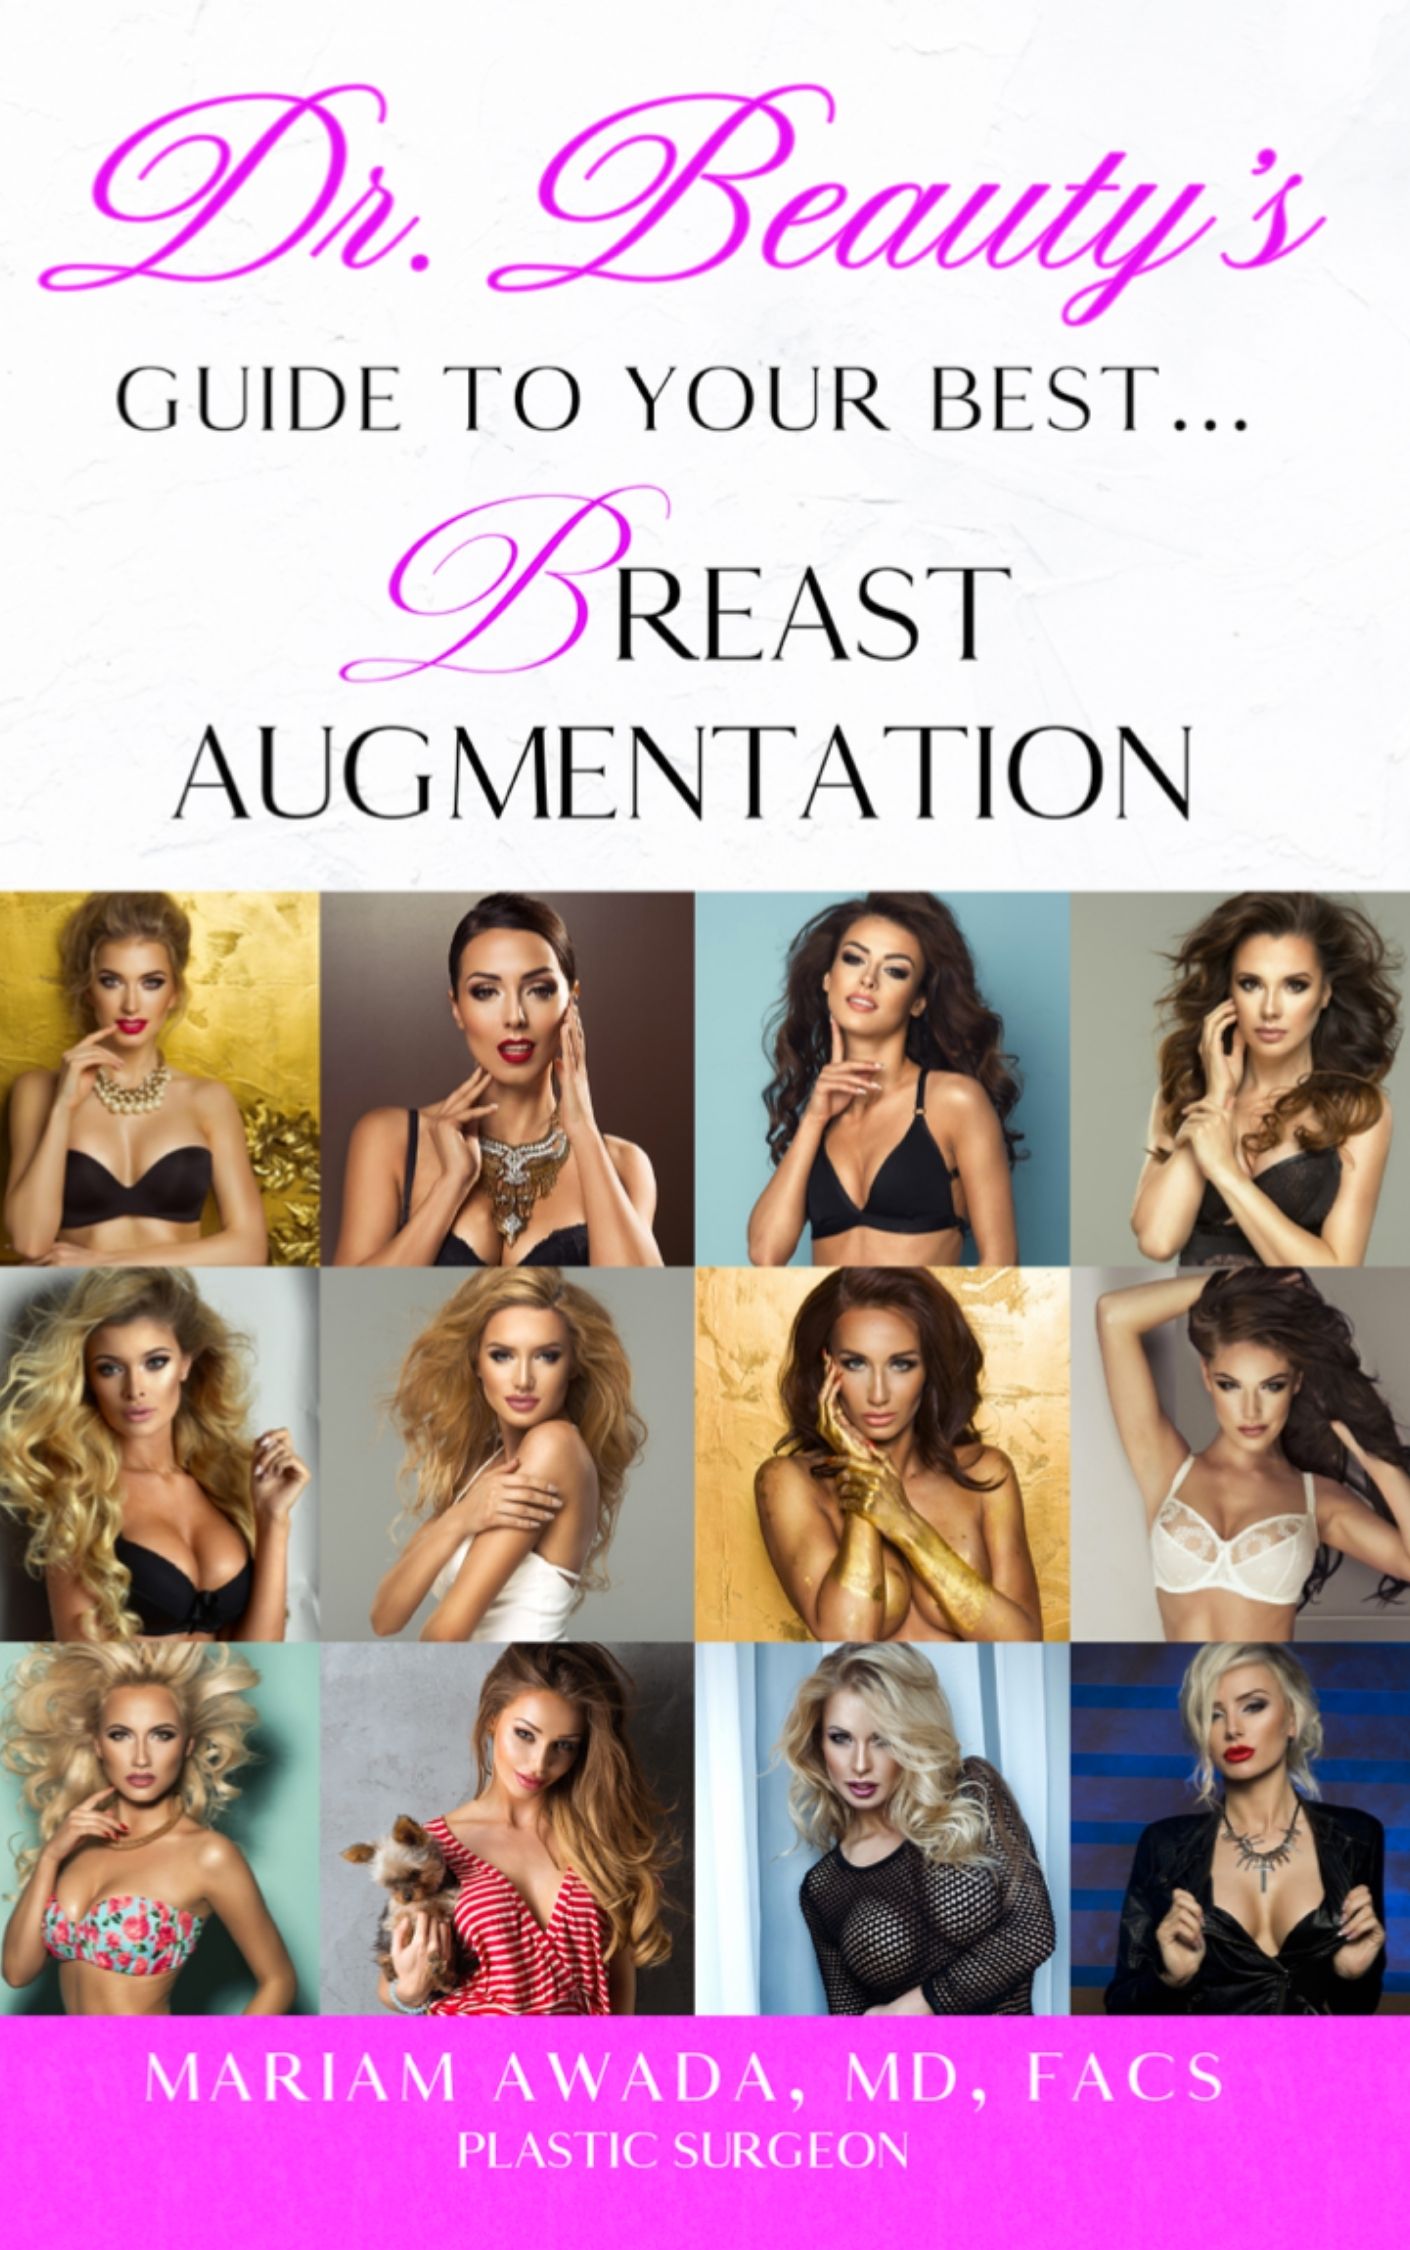 Dr. Beauty's Guide To You Best Breast Augmentation